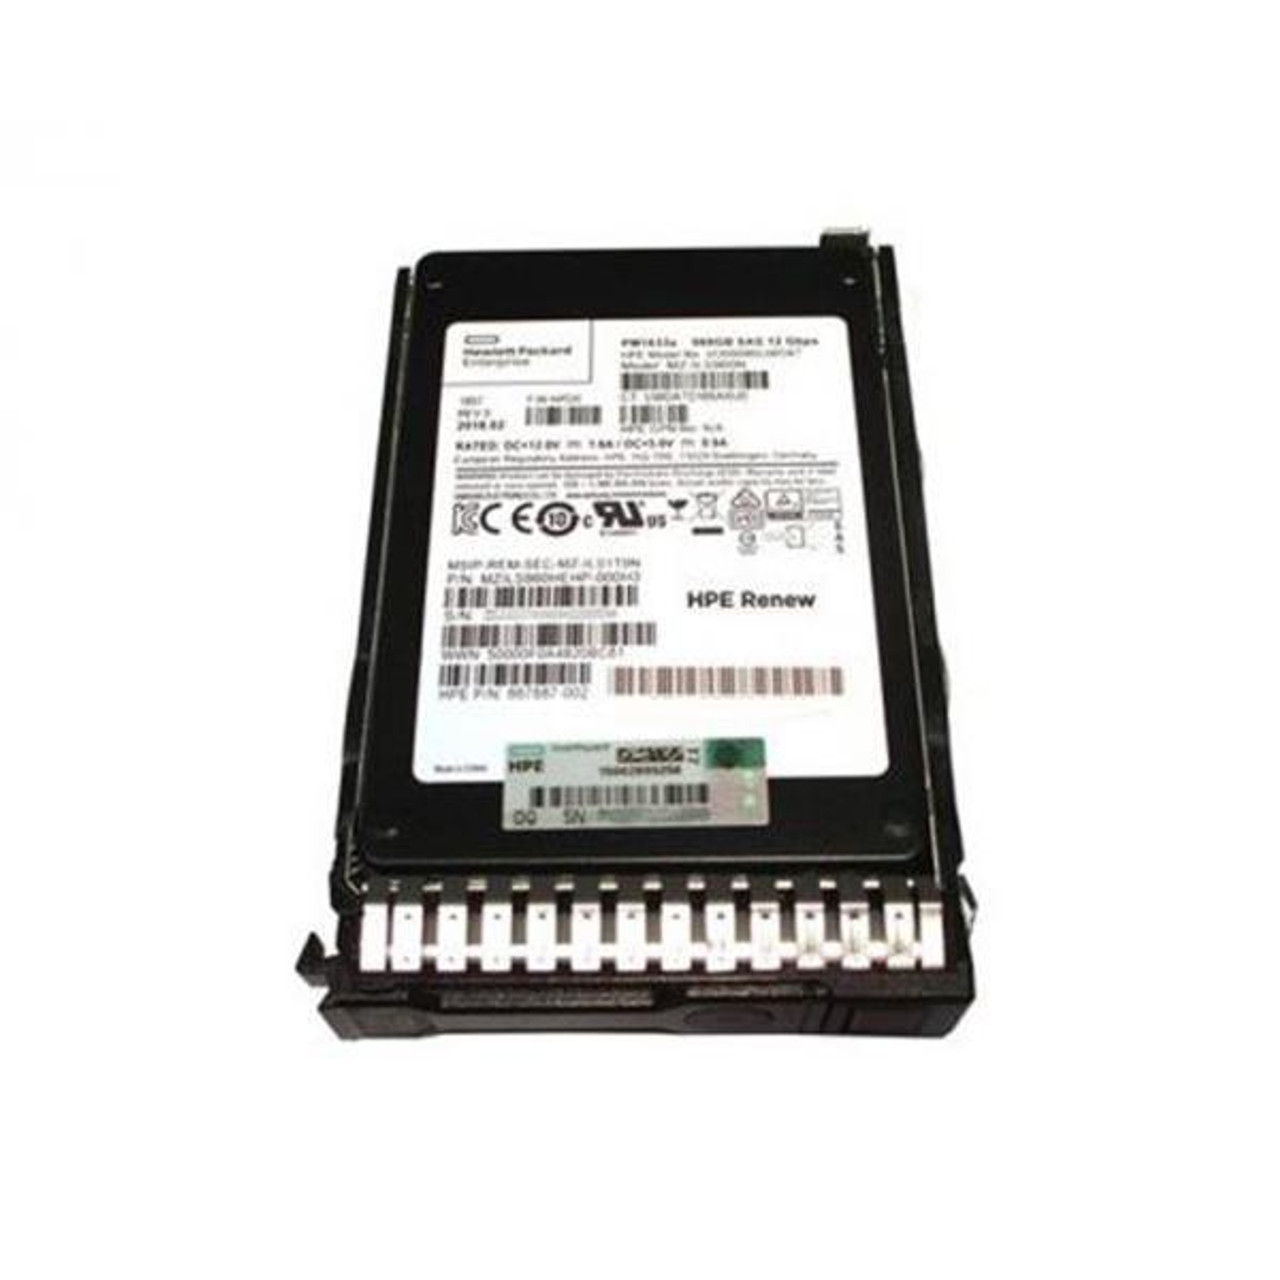 P10448-H21#0D1 HPE 960GB SAS 12Gbps Mixed Use 2.5-inch Internal Solid State Drive (SSD) with Smart Carrier